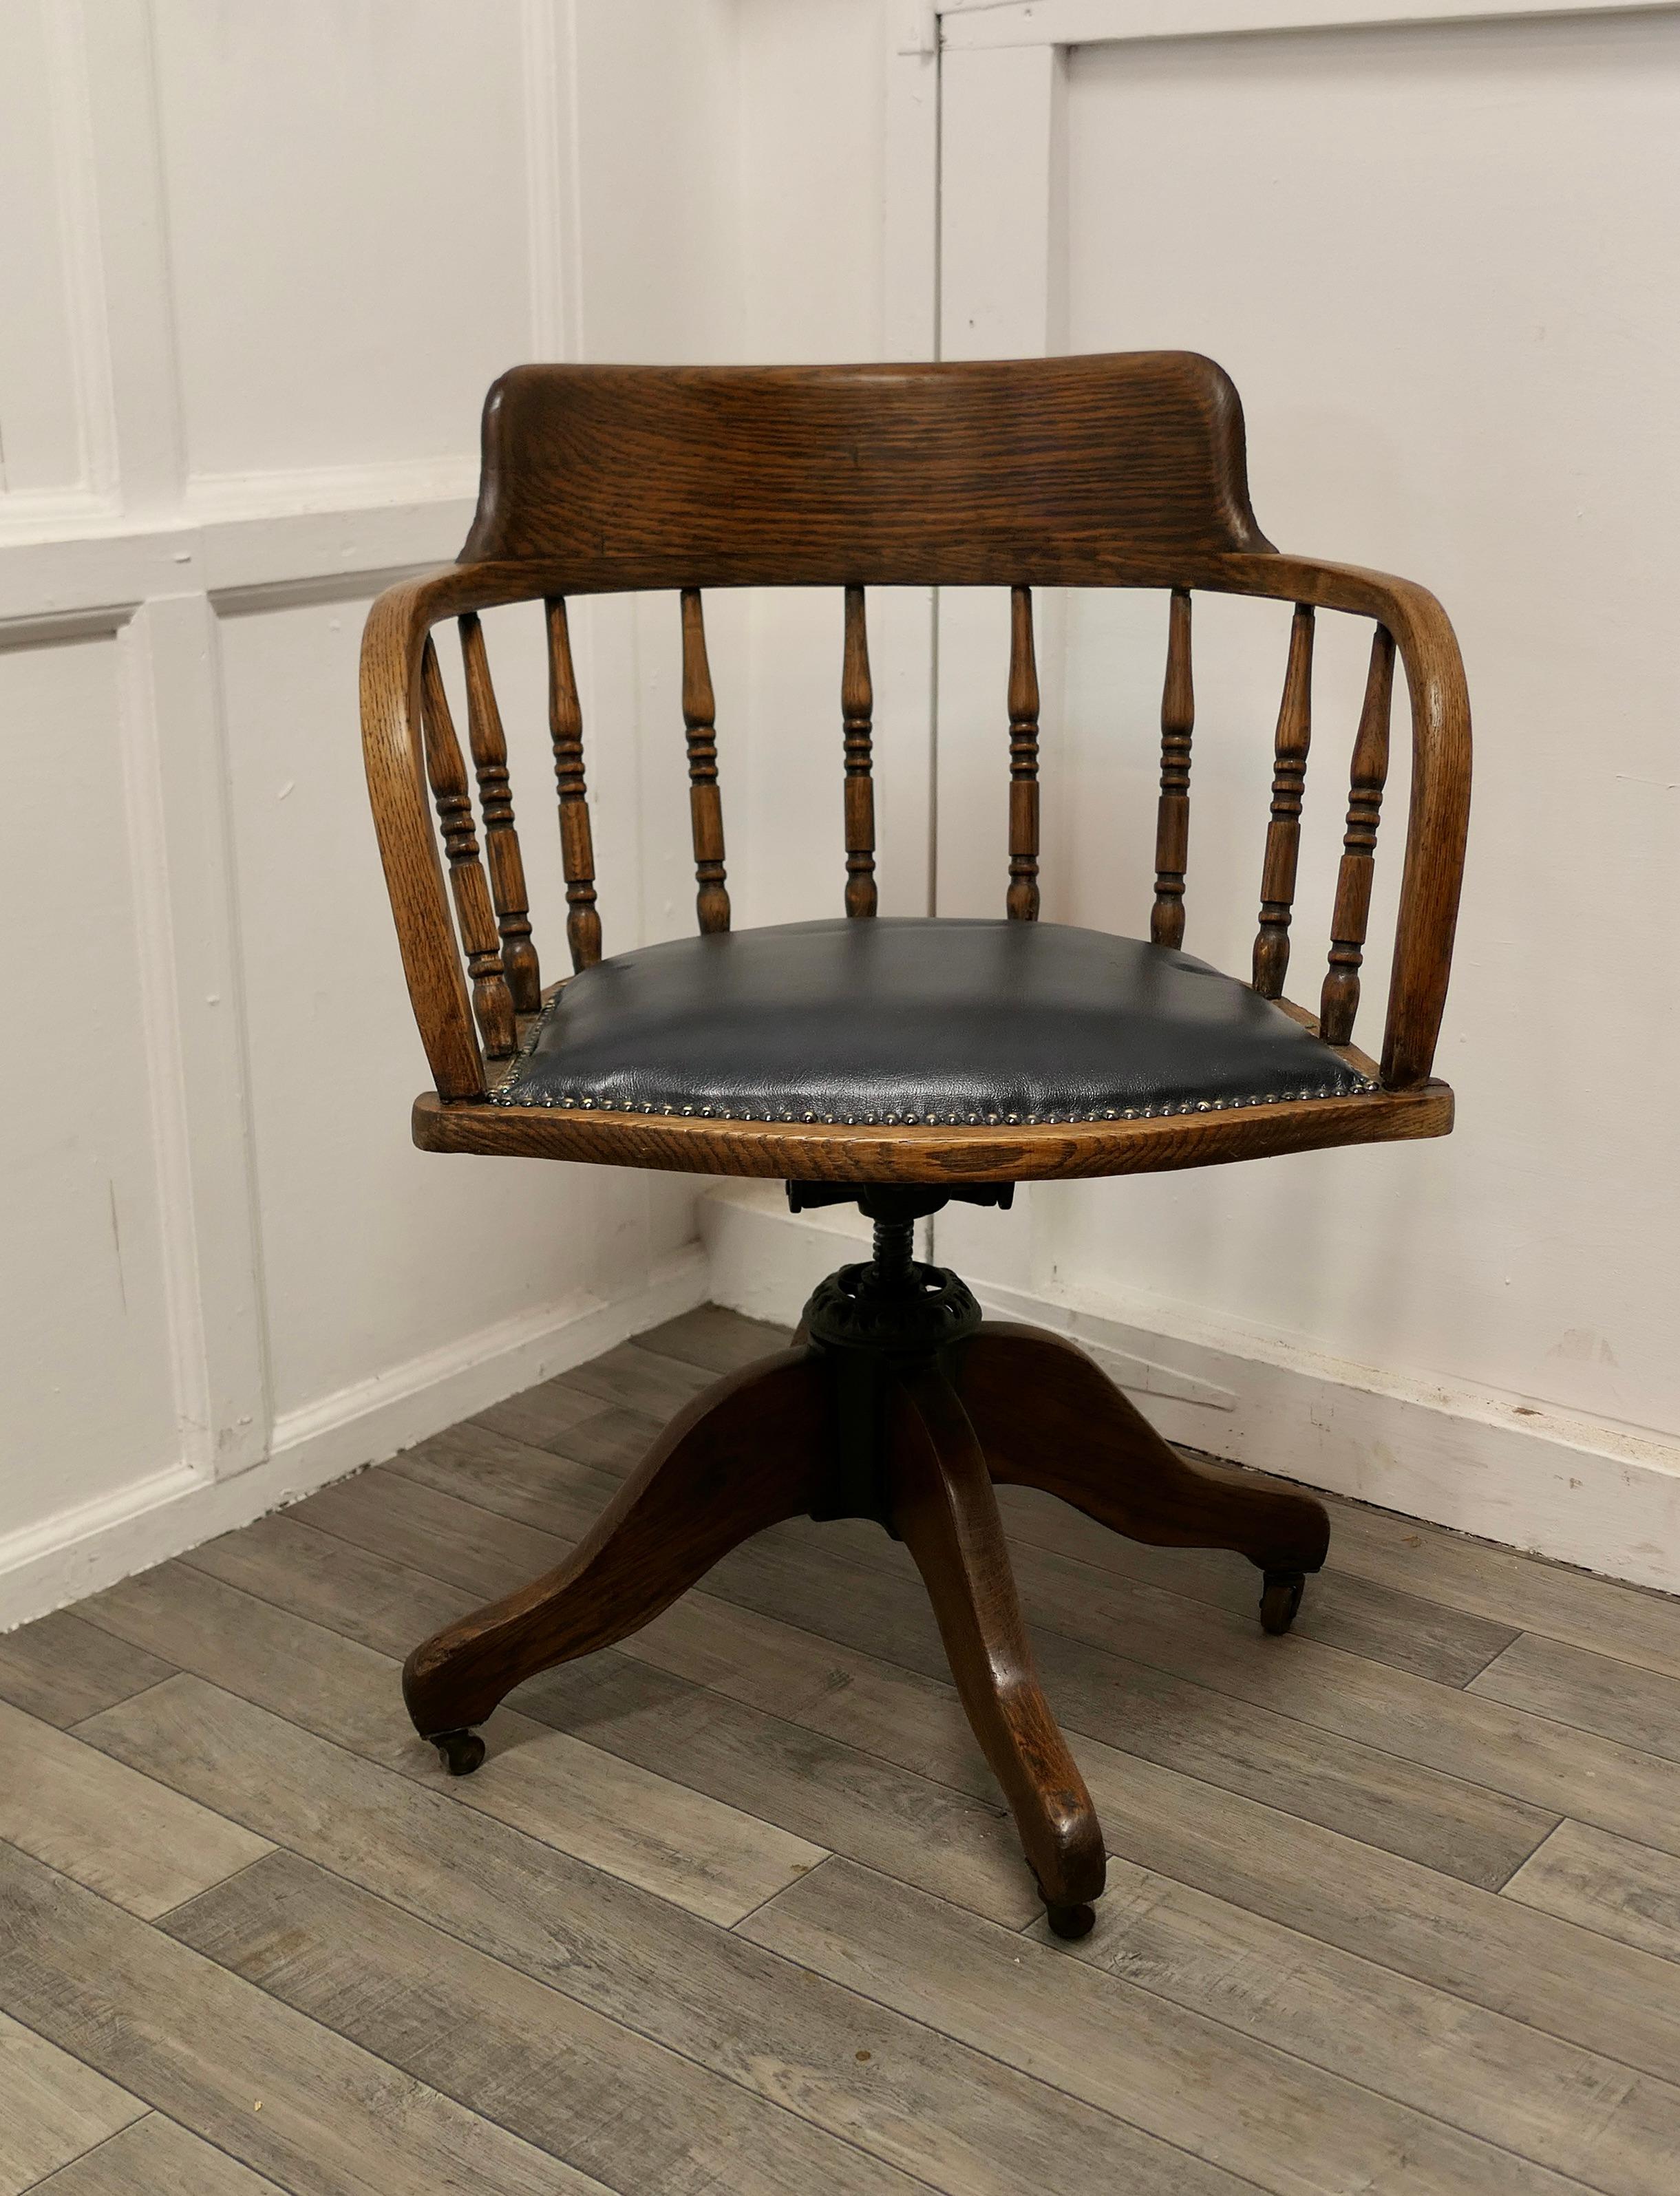 Edwardian oak office desk chair, smokers bow.

This office or desk chair has an attractive curving back with a very wide curved top rail and turned spindles beneath, the seat is upholstered in dark blue hide with brass studs
The chair swivels